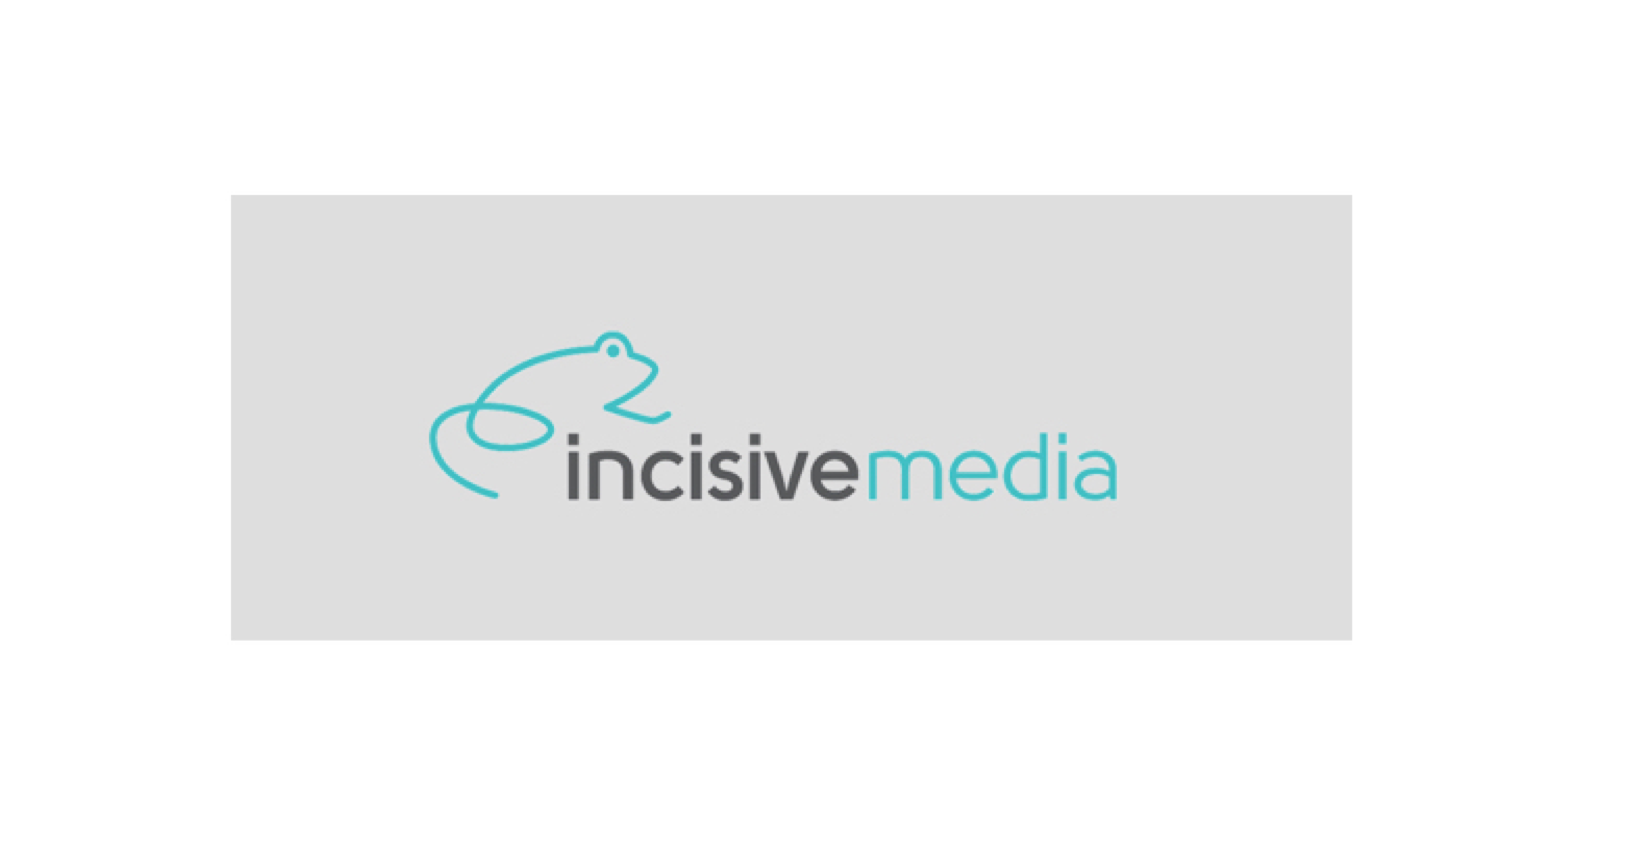 Incisive Media announces Ecosphere+ as their official carbon offset partner for 2019